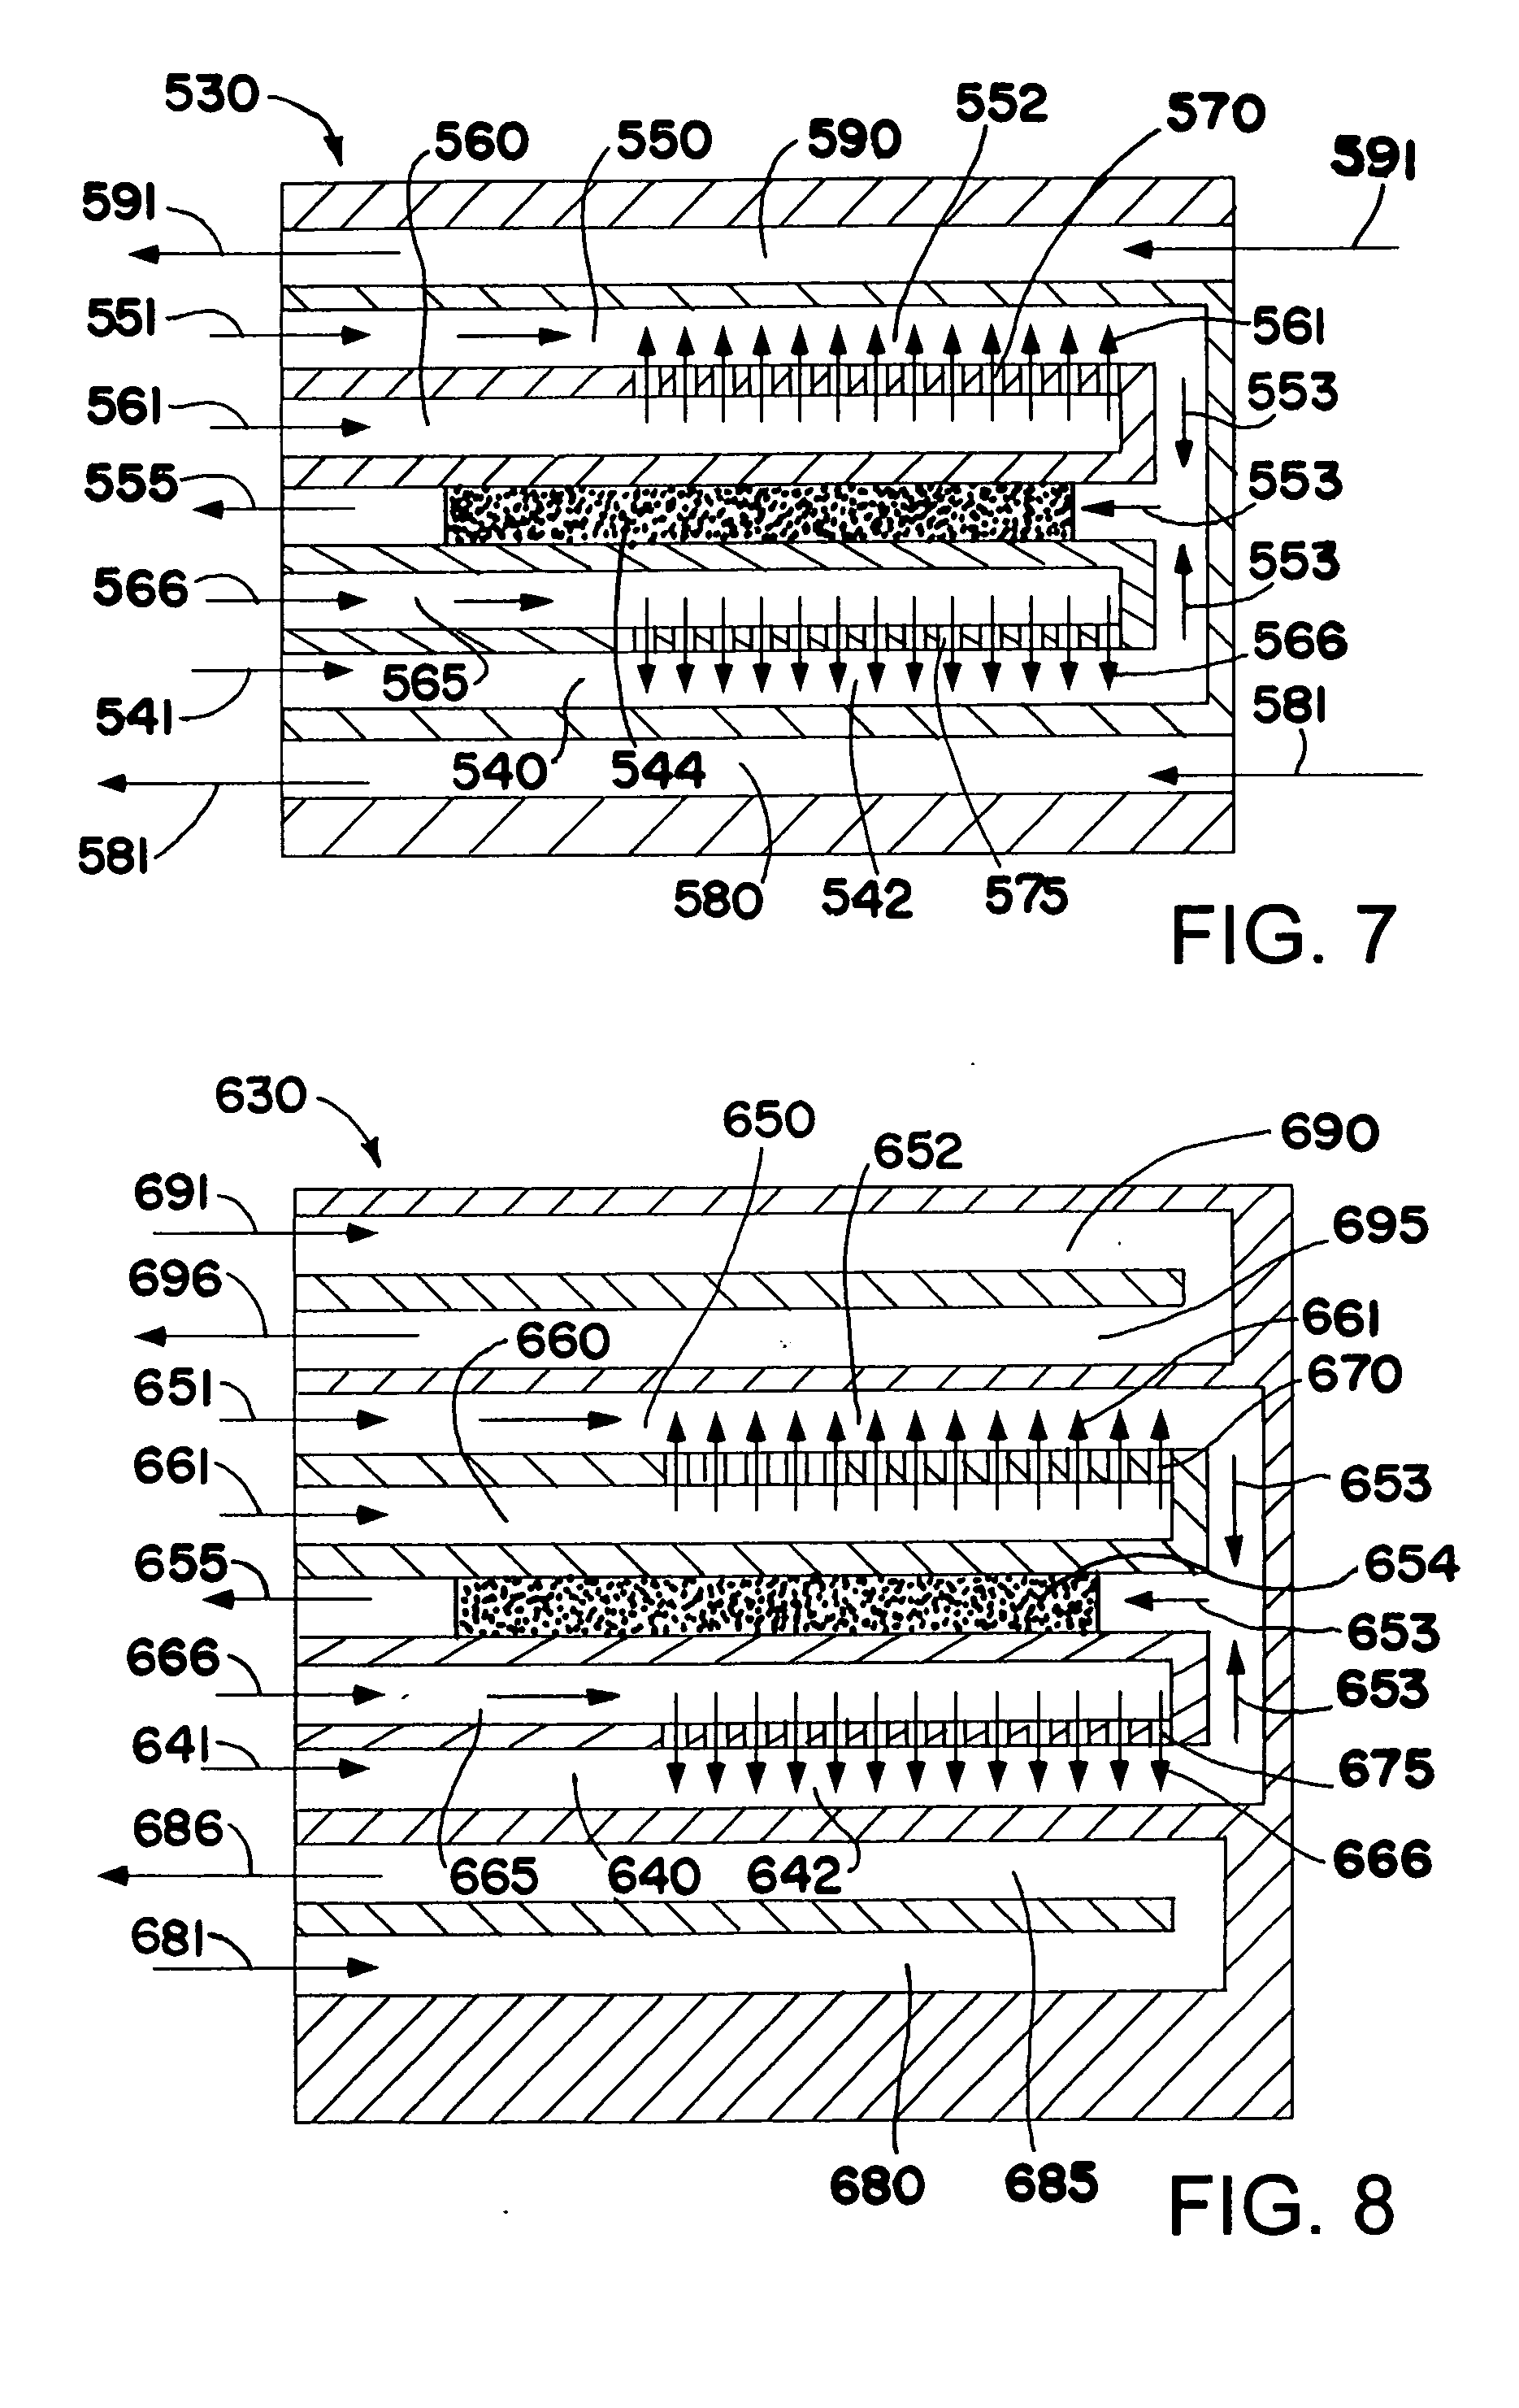 Process for producing hydrogen peroxide using microchannel technology